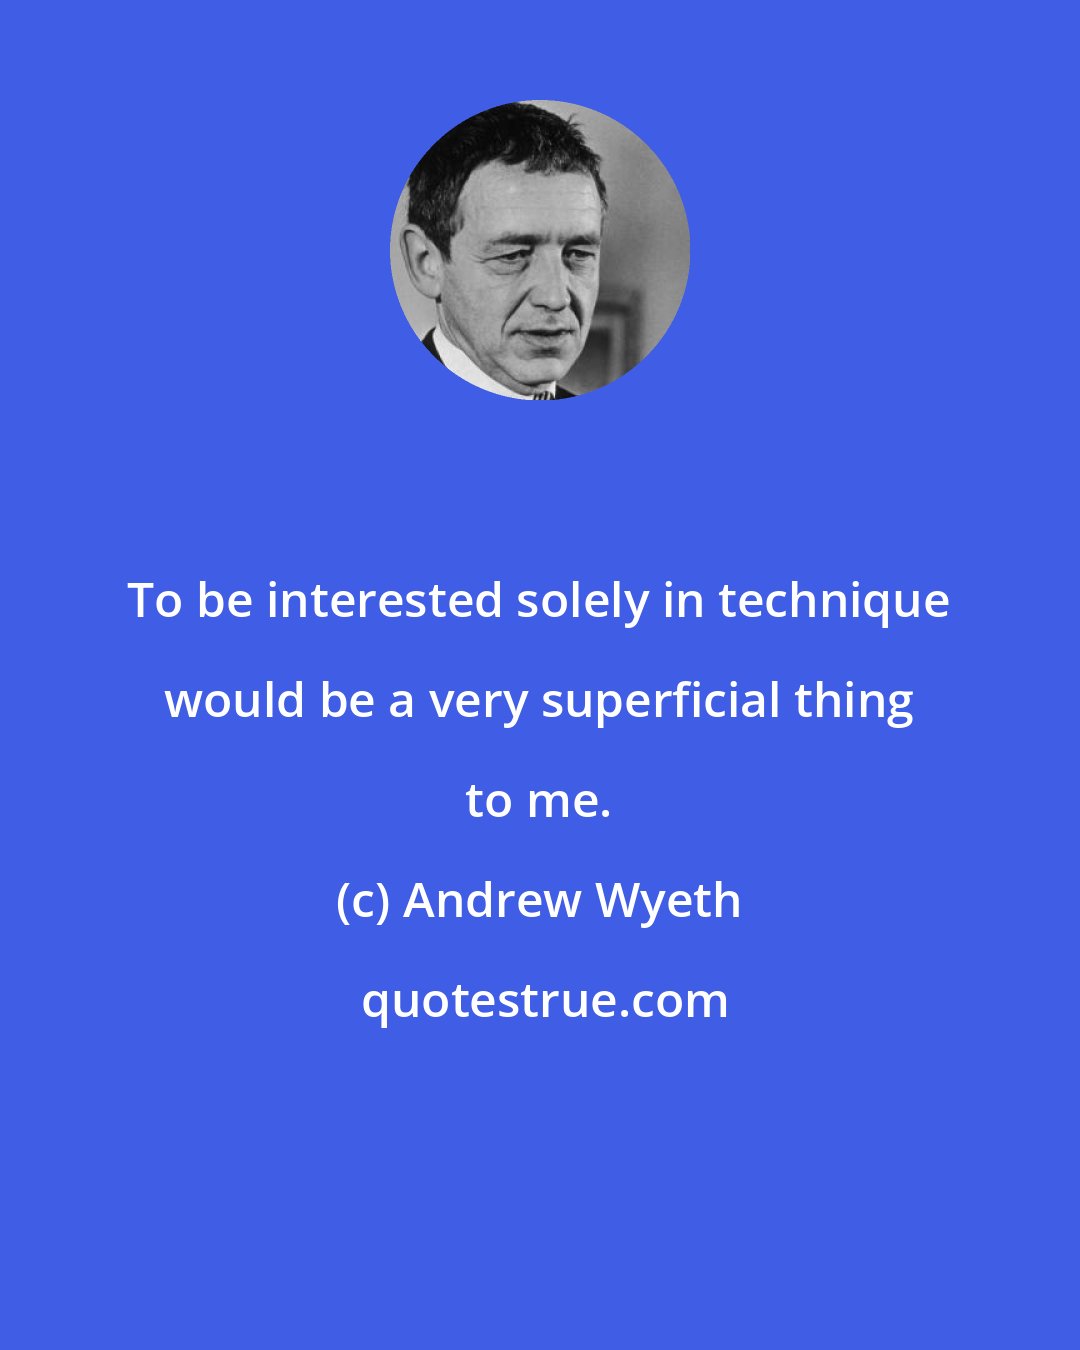 Andrew Wyeth: To be interested solely in technique would be a very superficial thing to me.